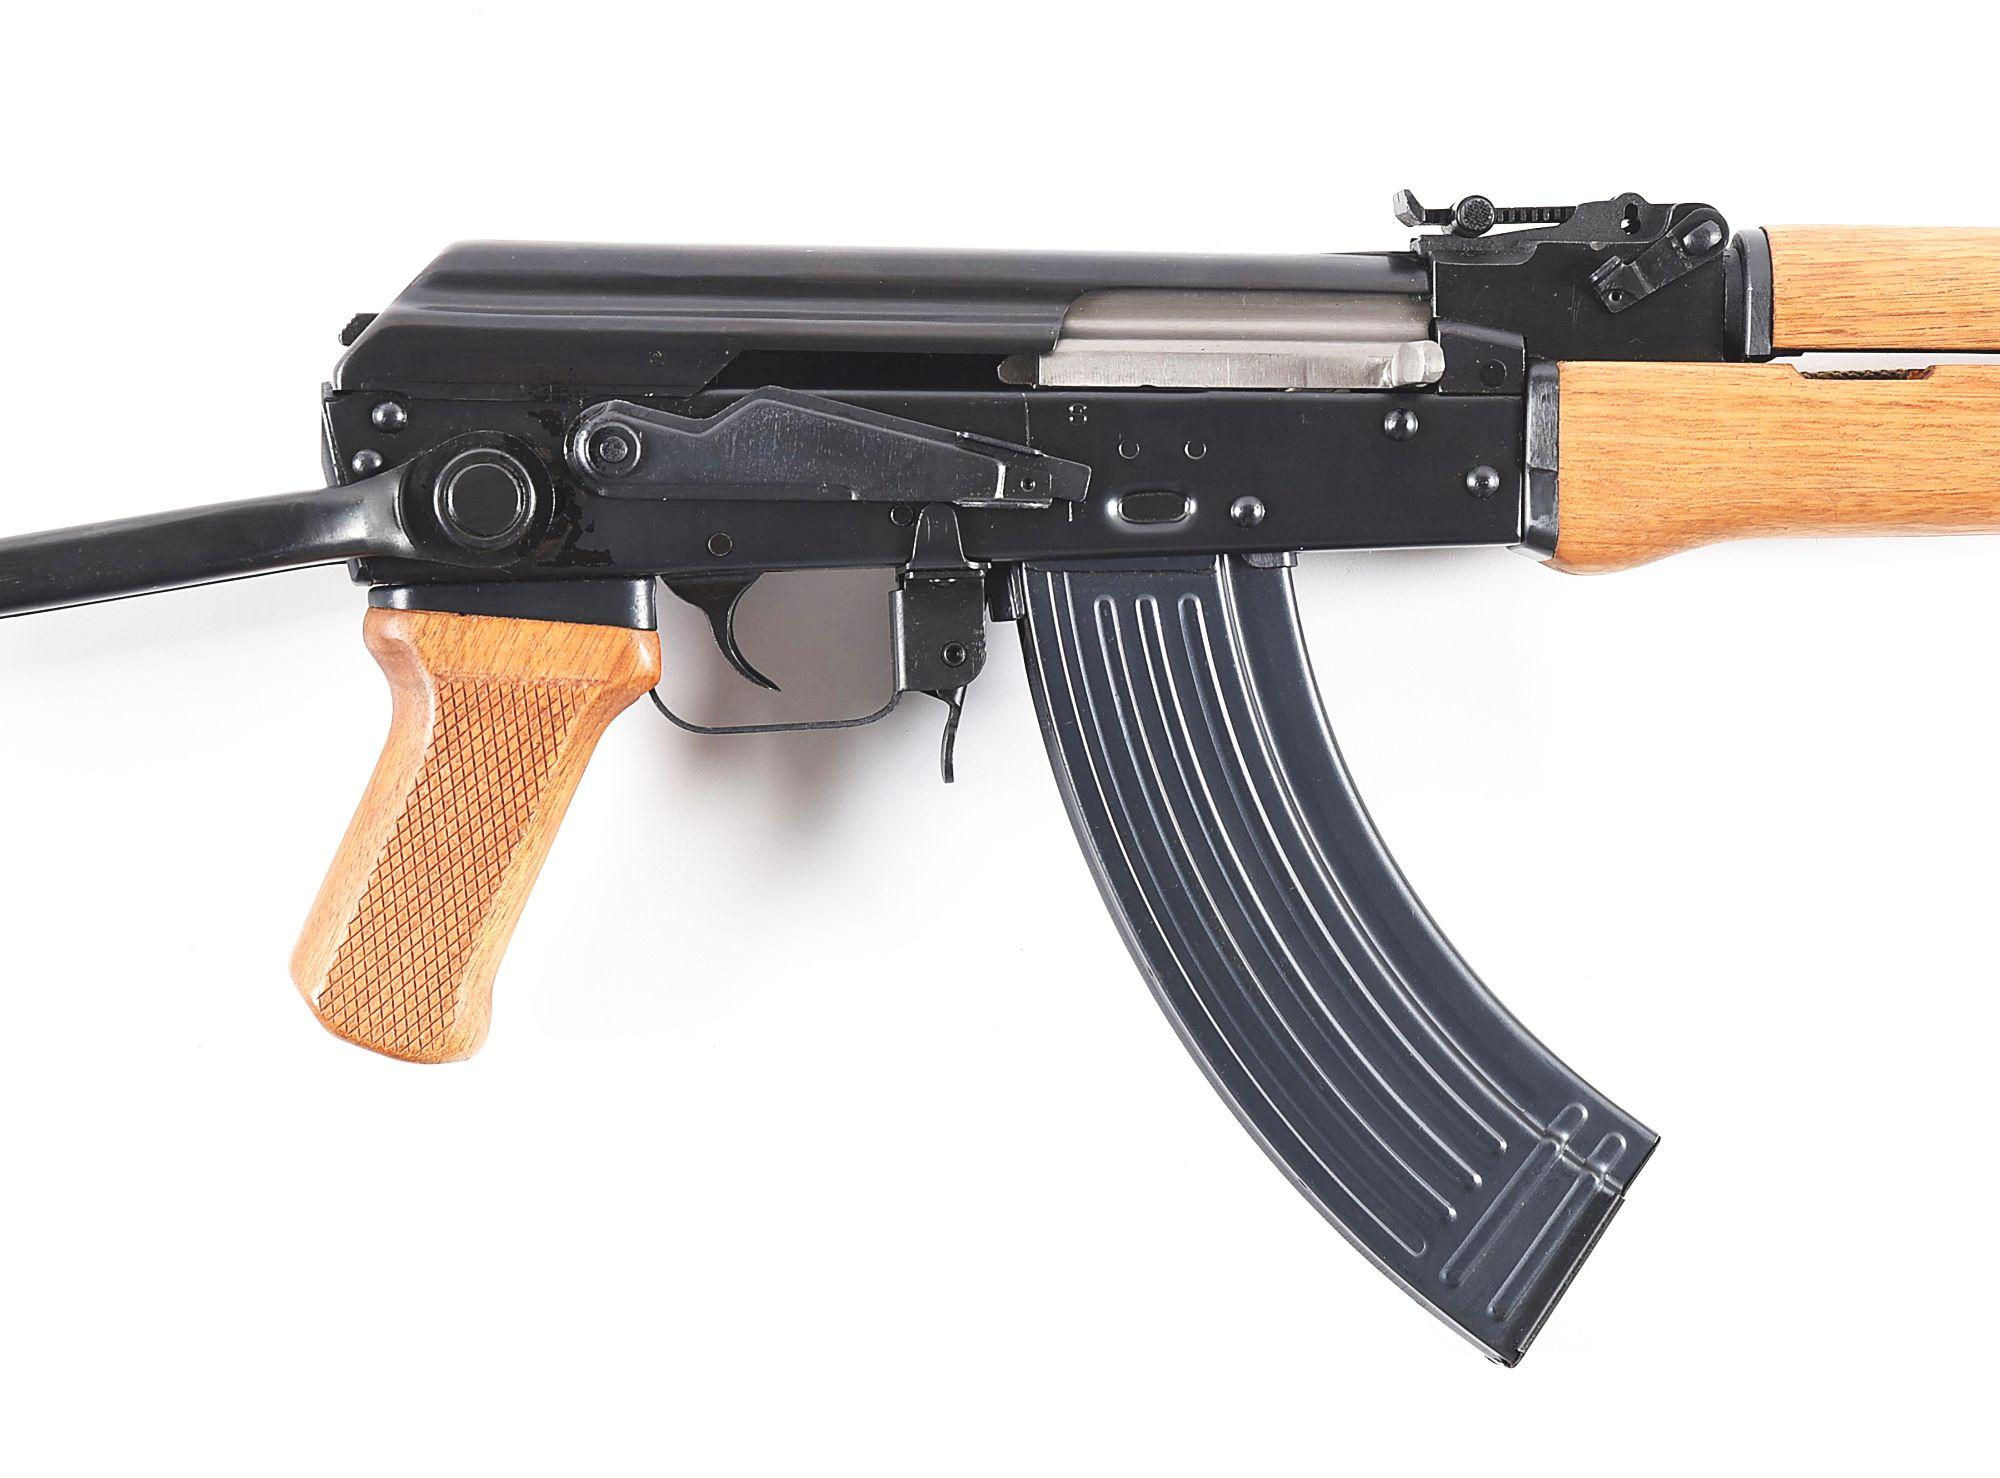 (M) EXCELLENT PRE-BAN POLYETCH AKS-762 SPIKER UNDERFOLDER SEMI-AUTOMATIC RIFLE WITH BOX.